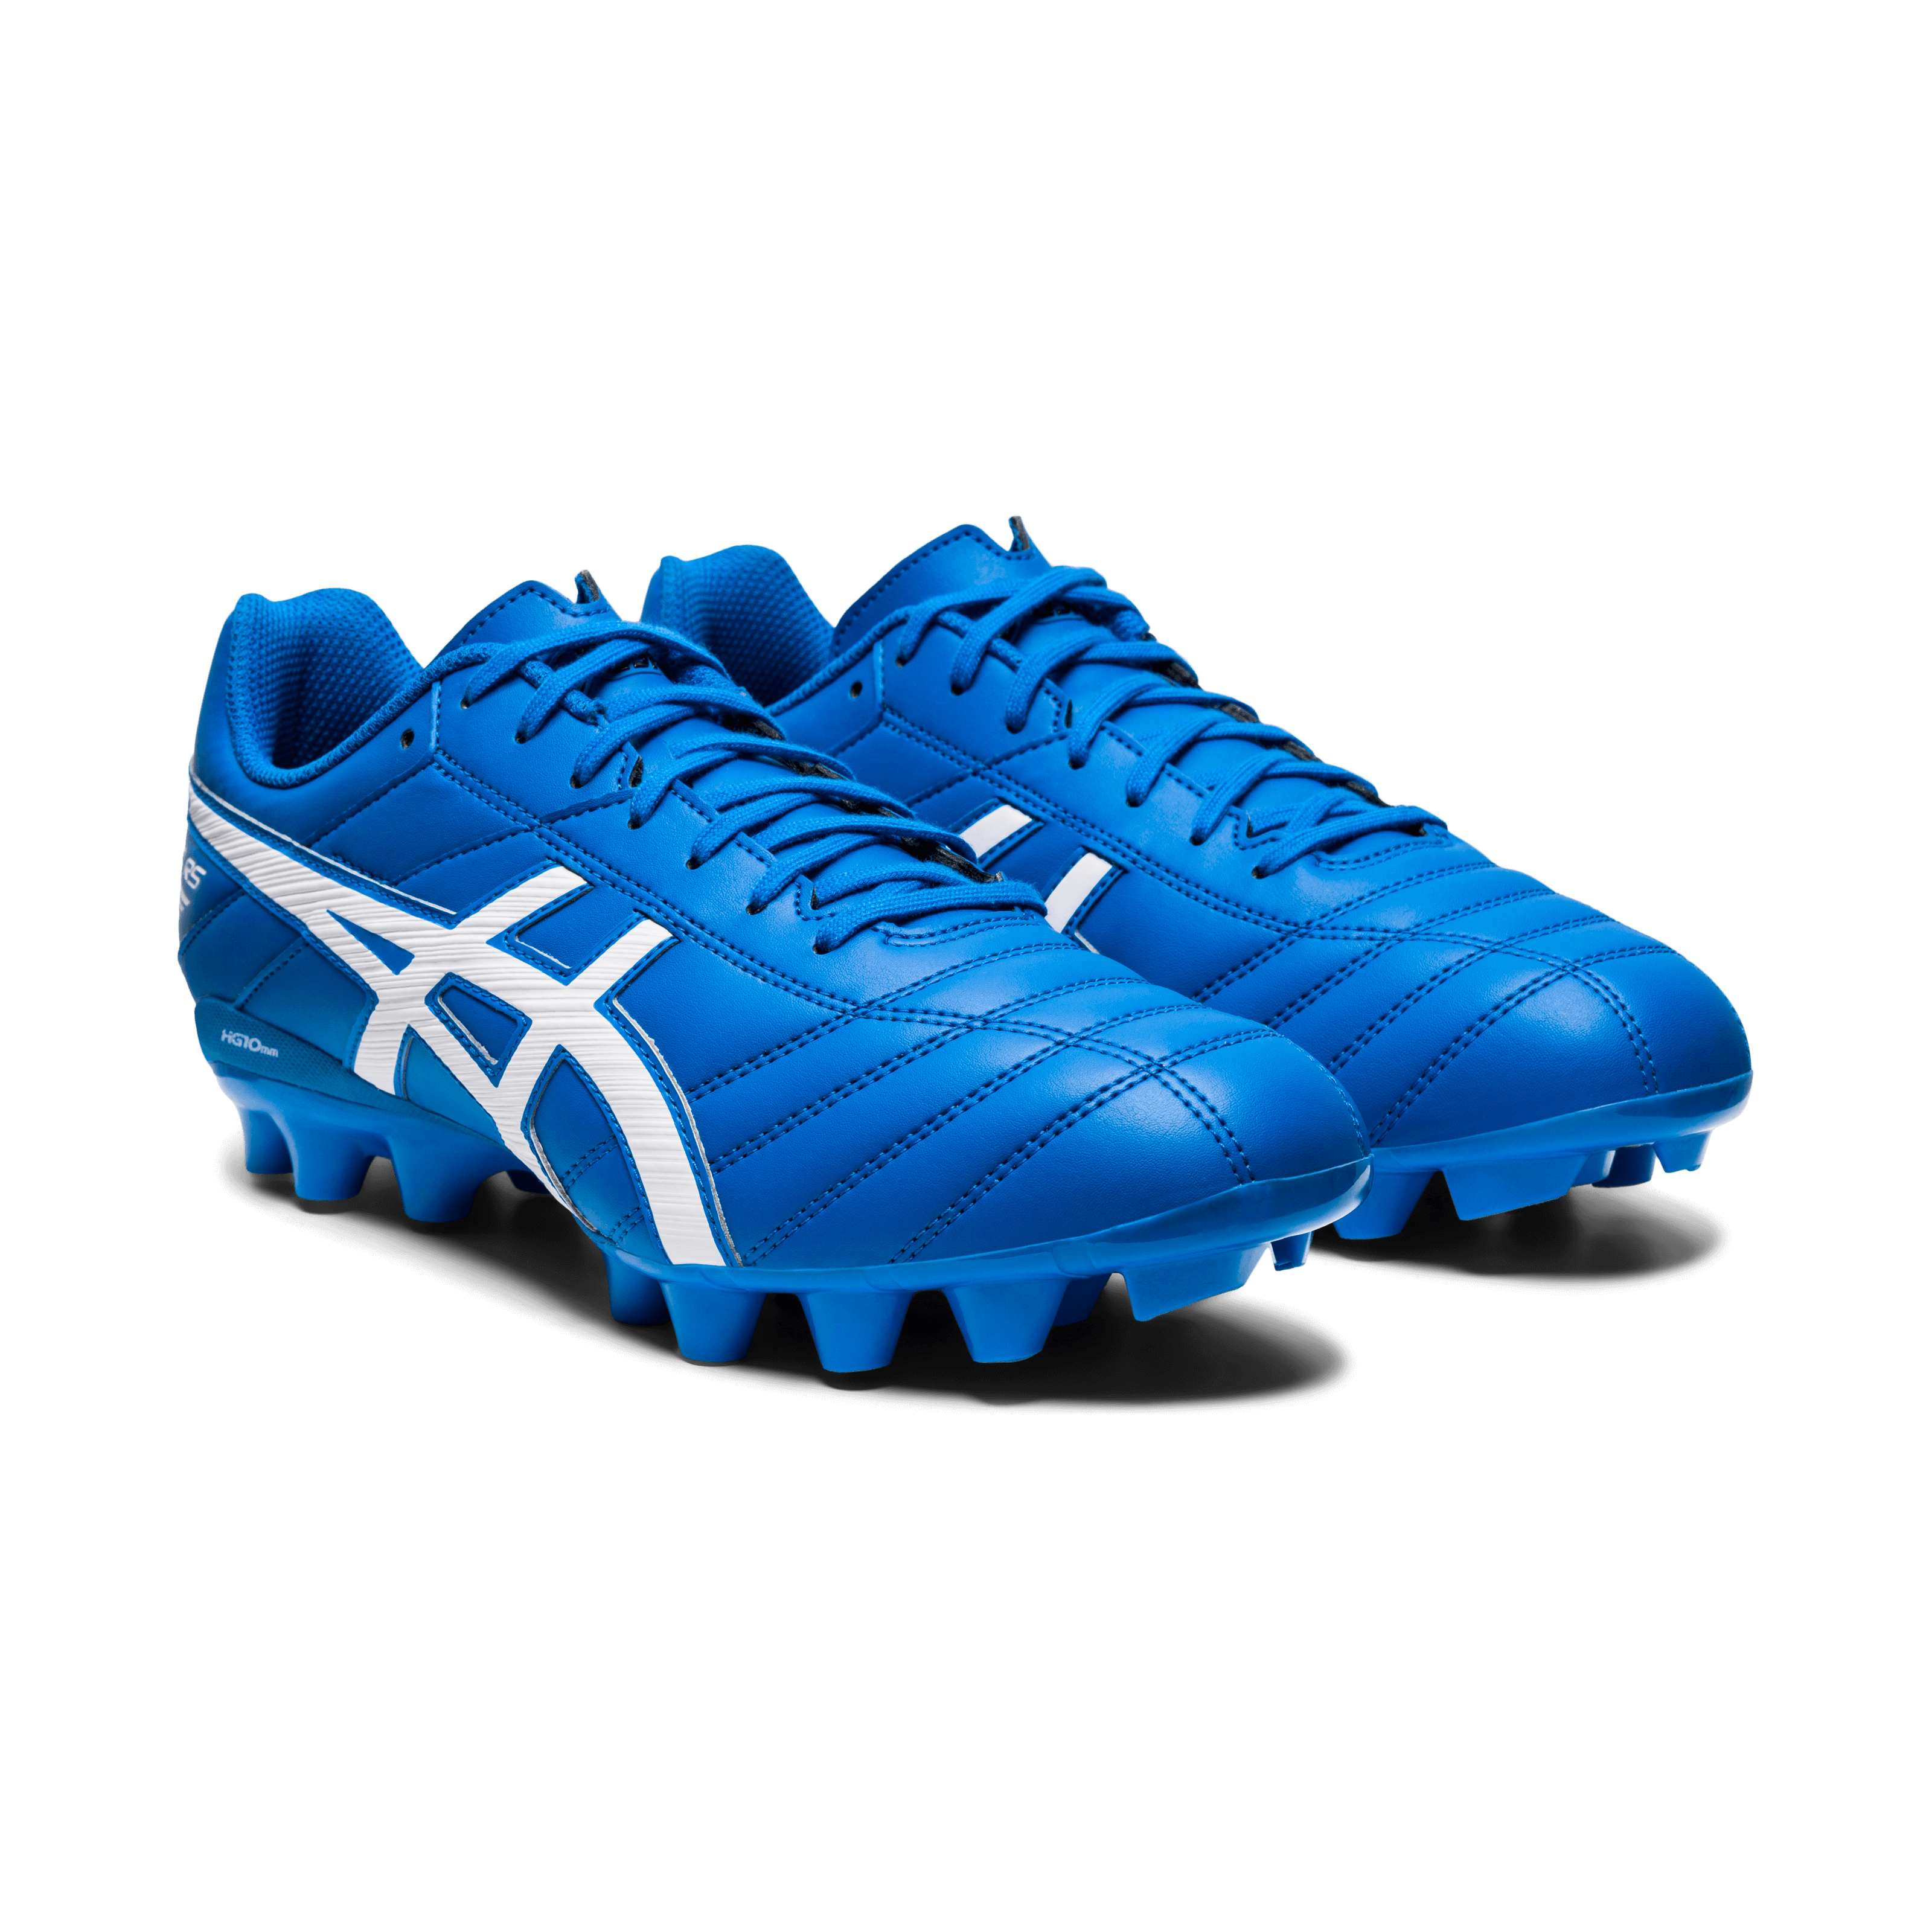 Asics Rugby Boots | Football, Rugby Union & -